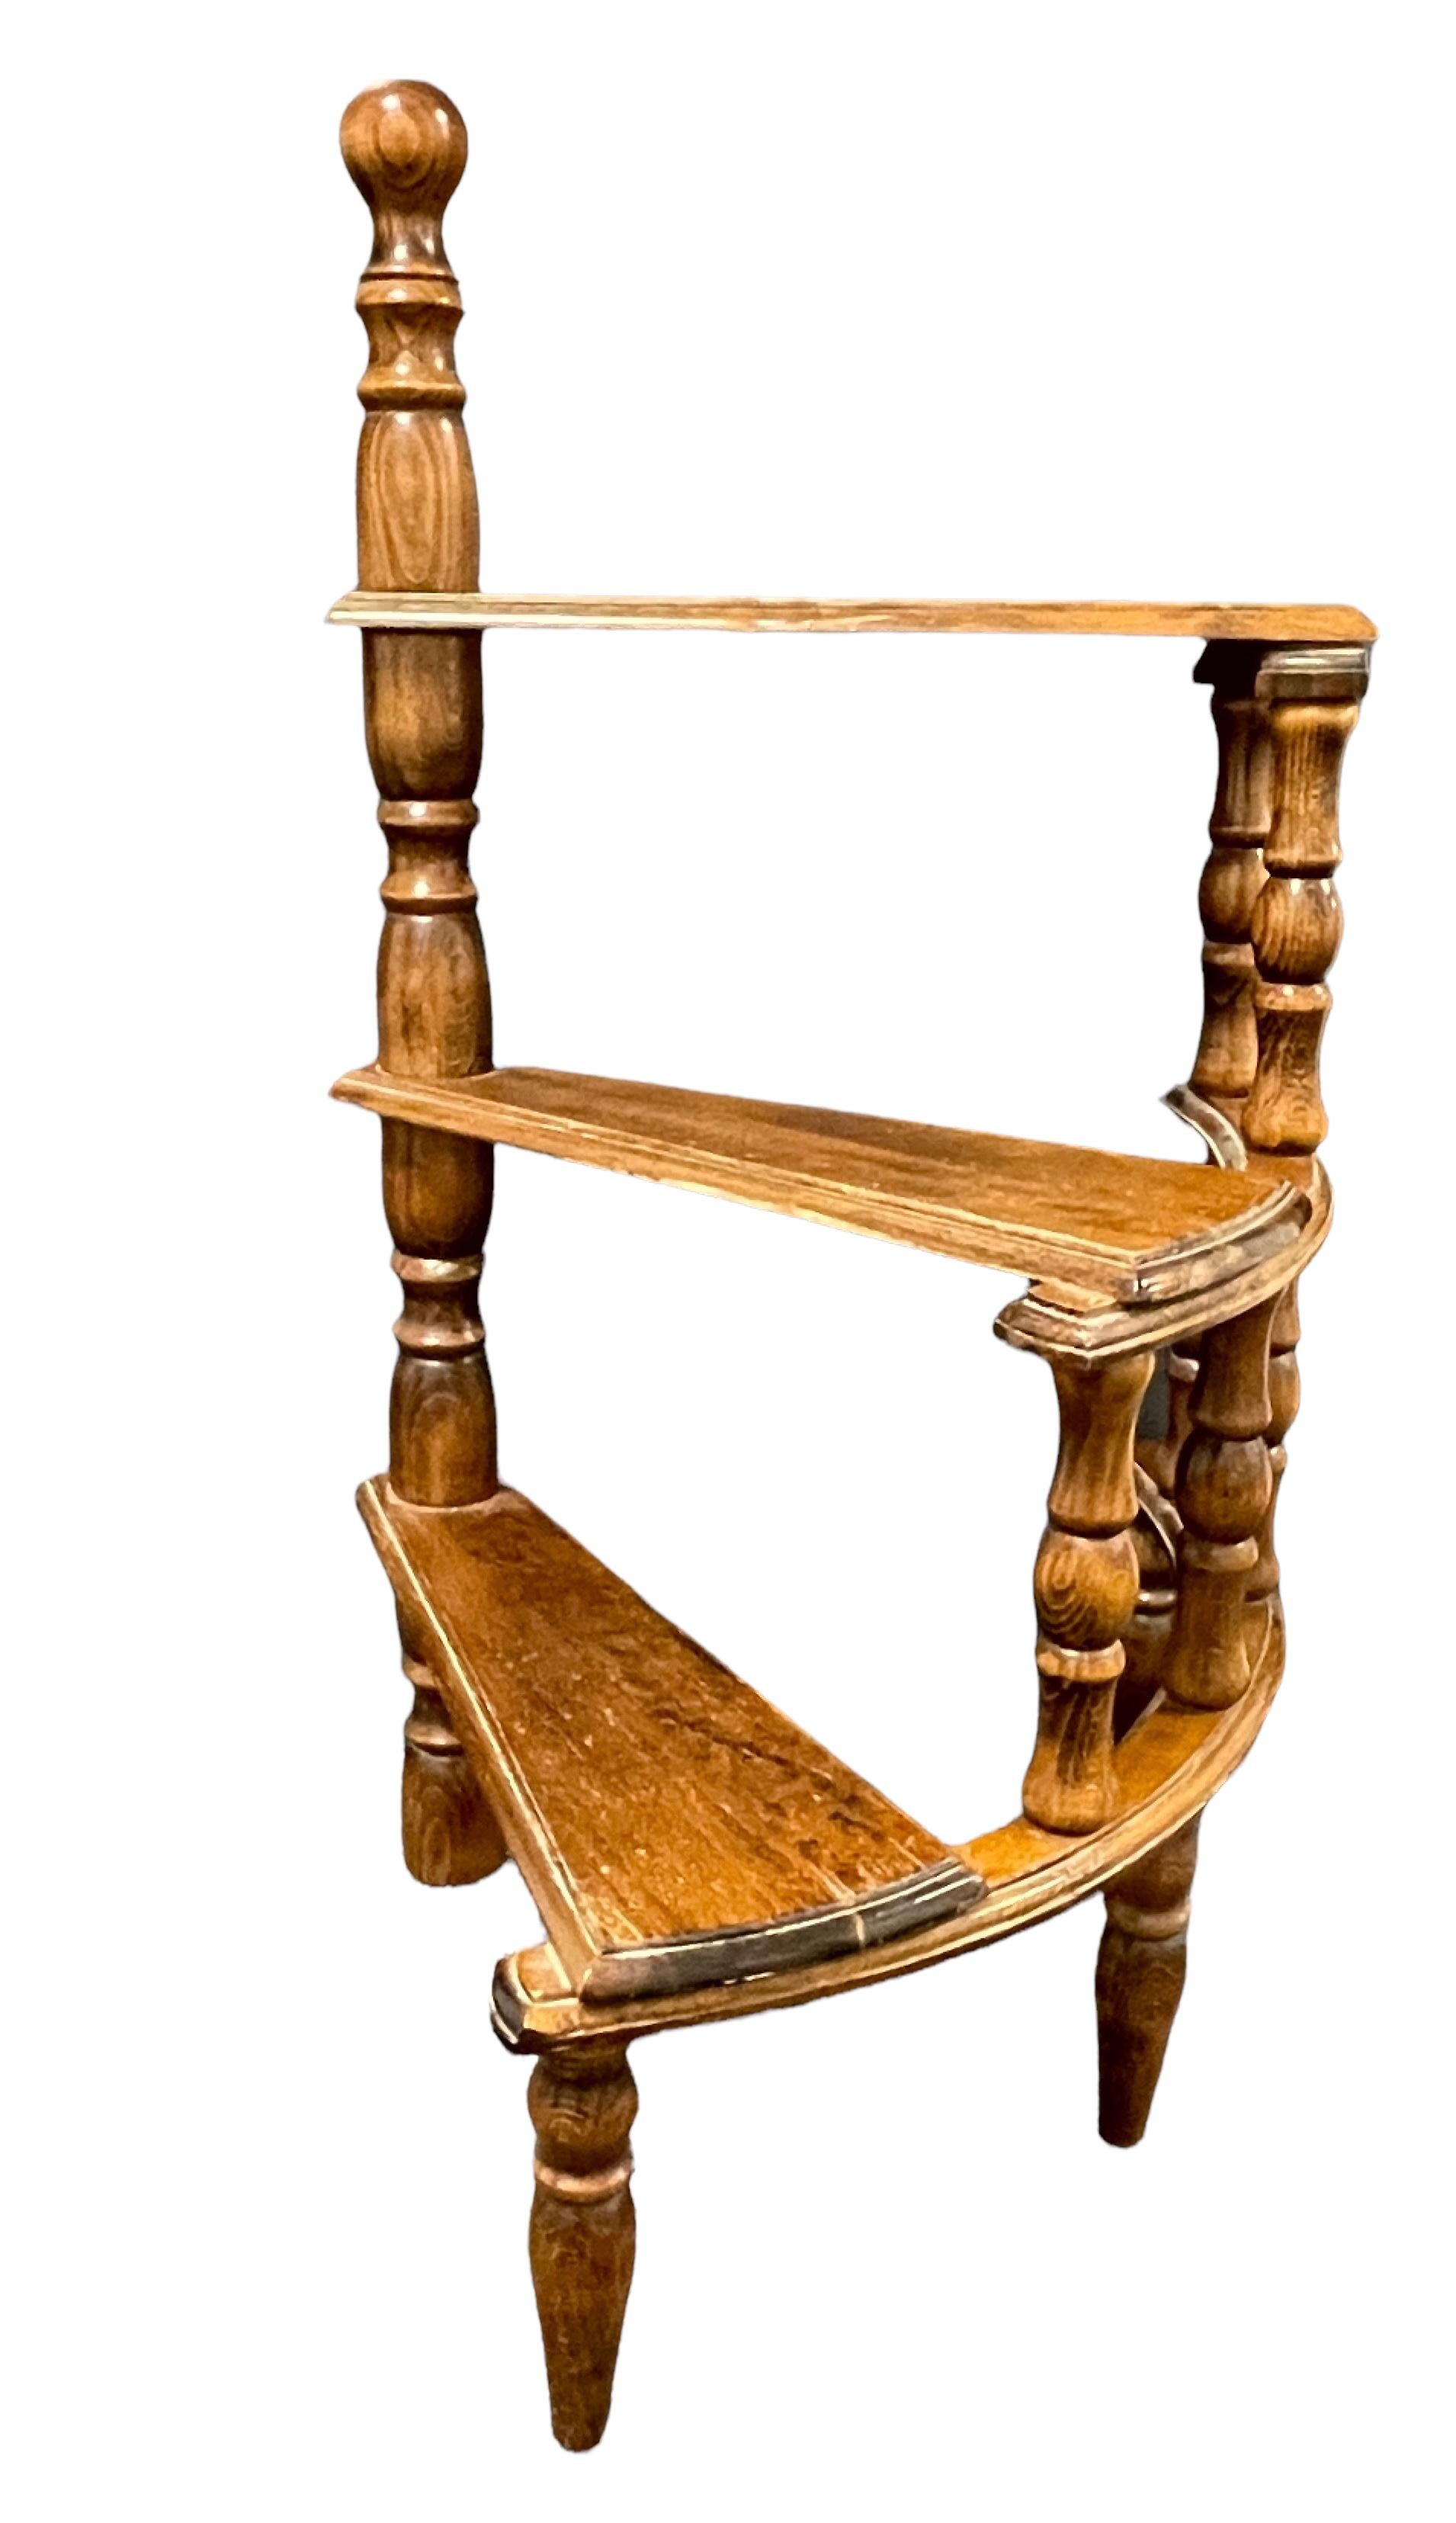 Created in Germany circa 1960 and standing on turned legs, the circular step ladder features three stairs rolled around a turned central post. Versatile and practical, the elegant library essential is in very good used condition with a nice patina.